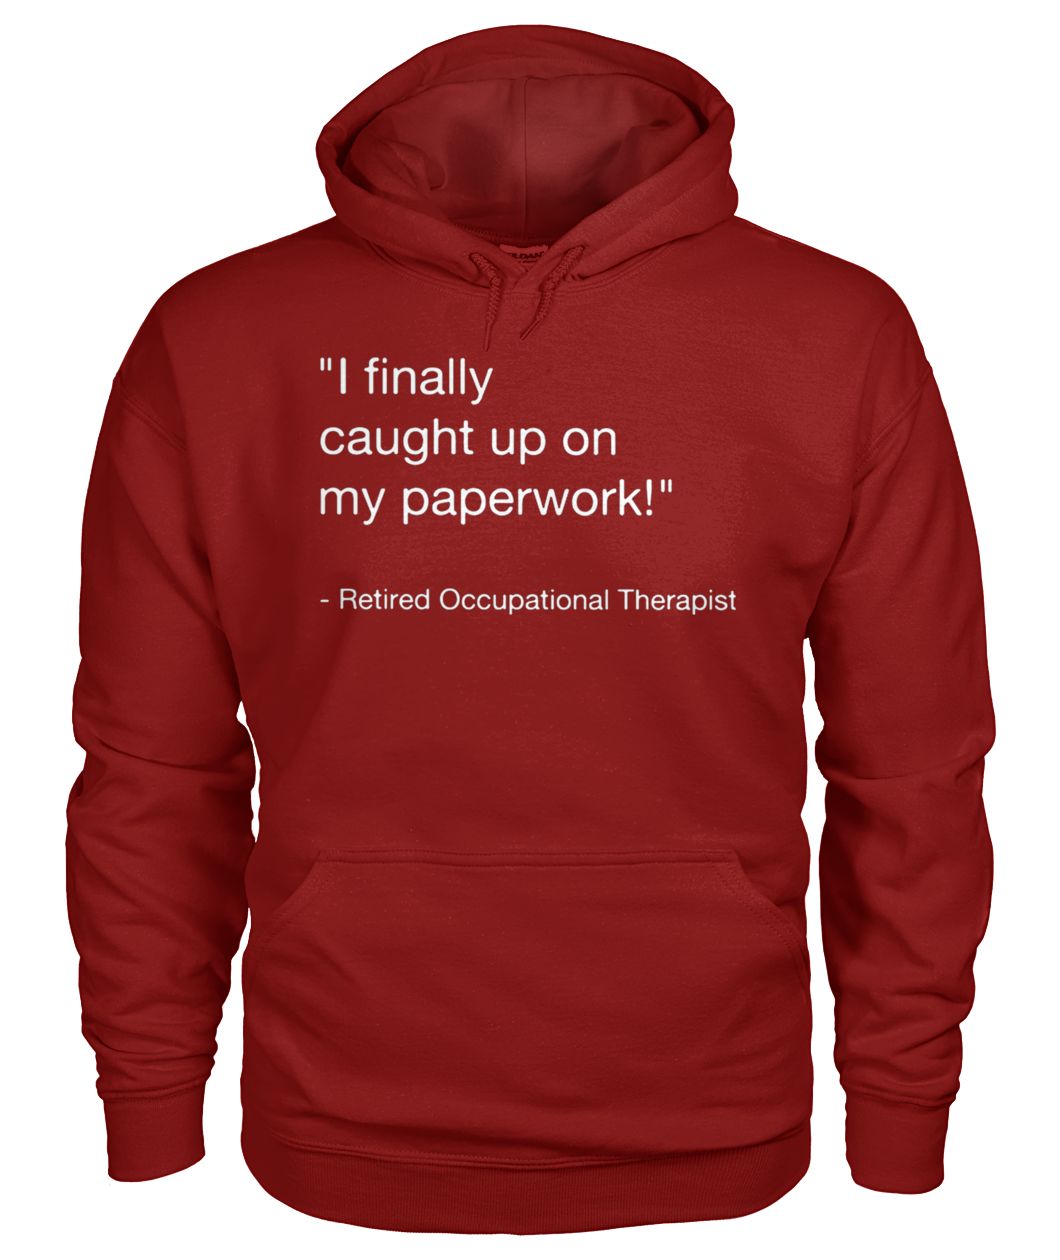 I finally caught up on paperwork retired occupational therapist gildan hoodie